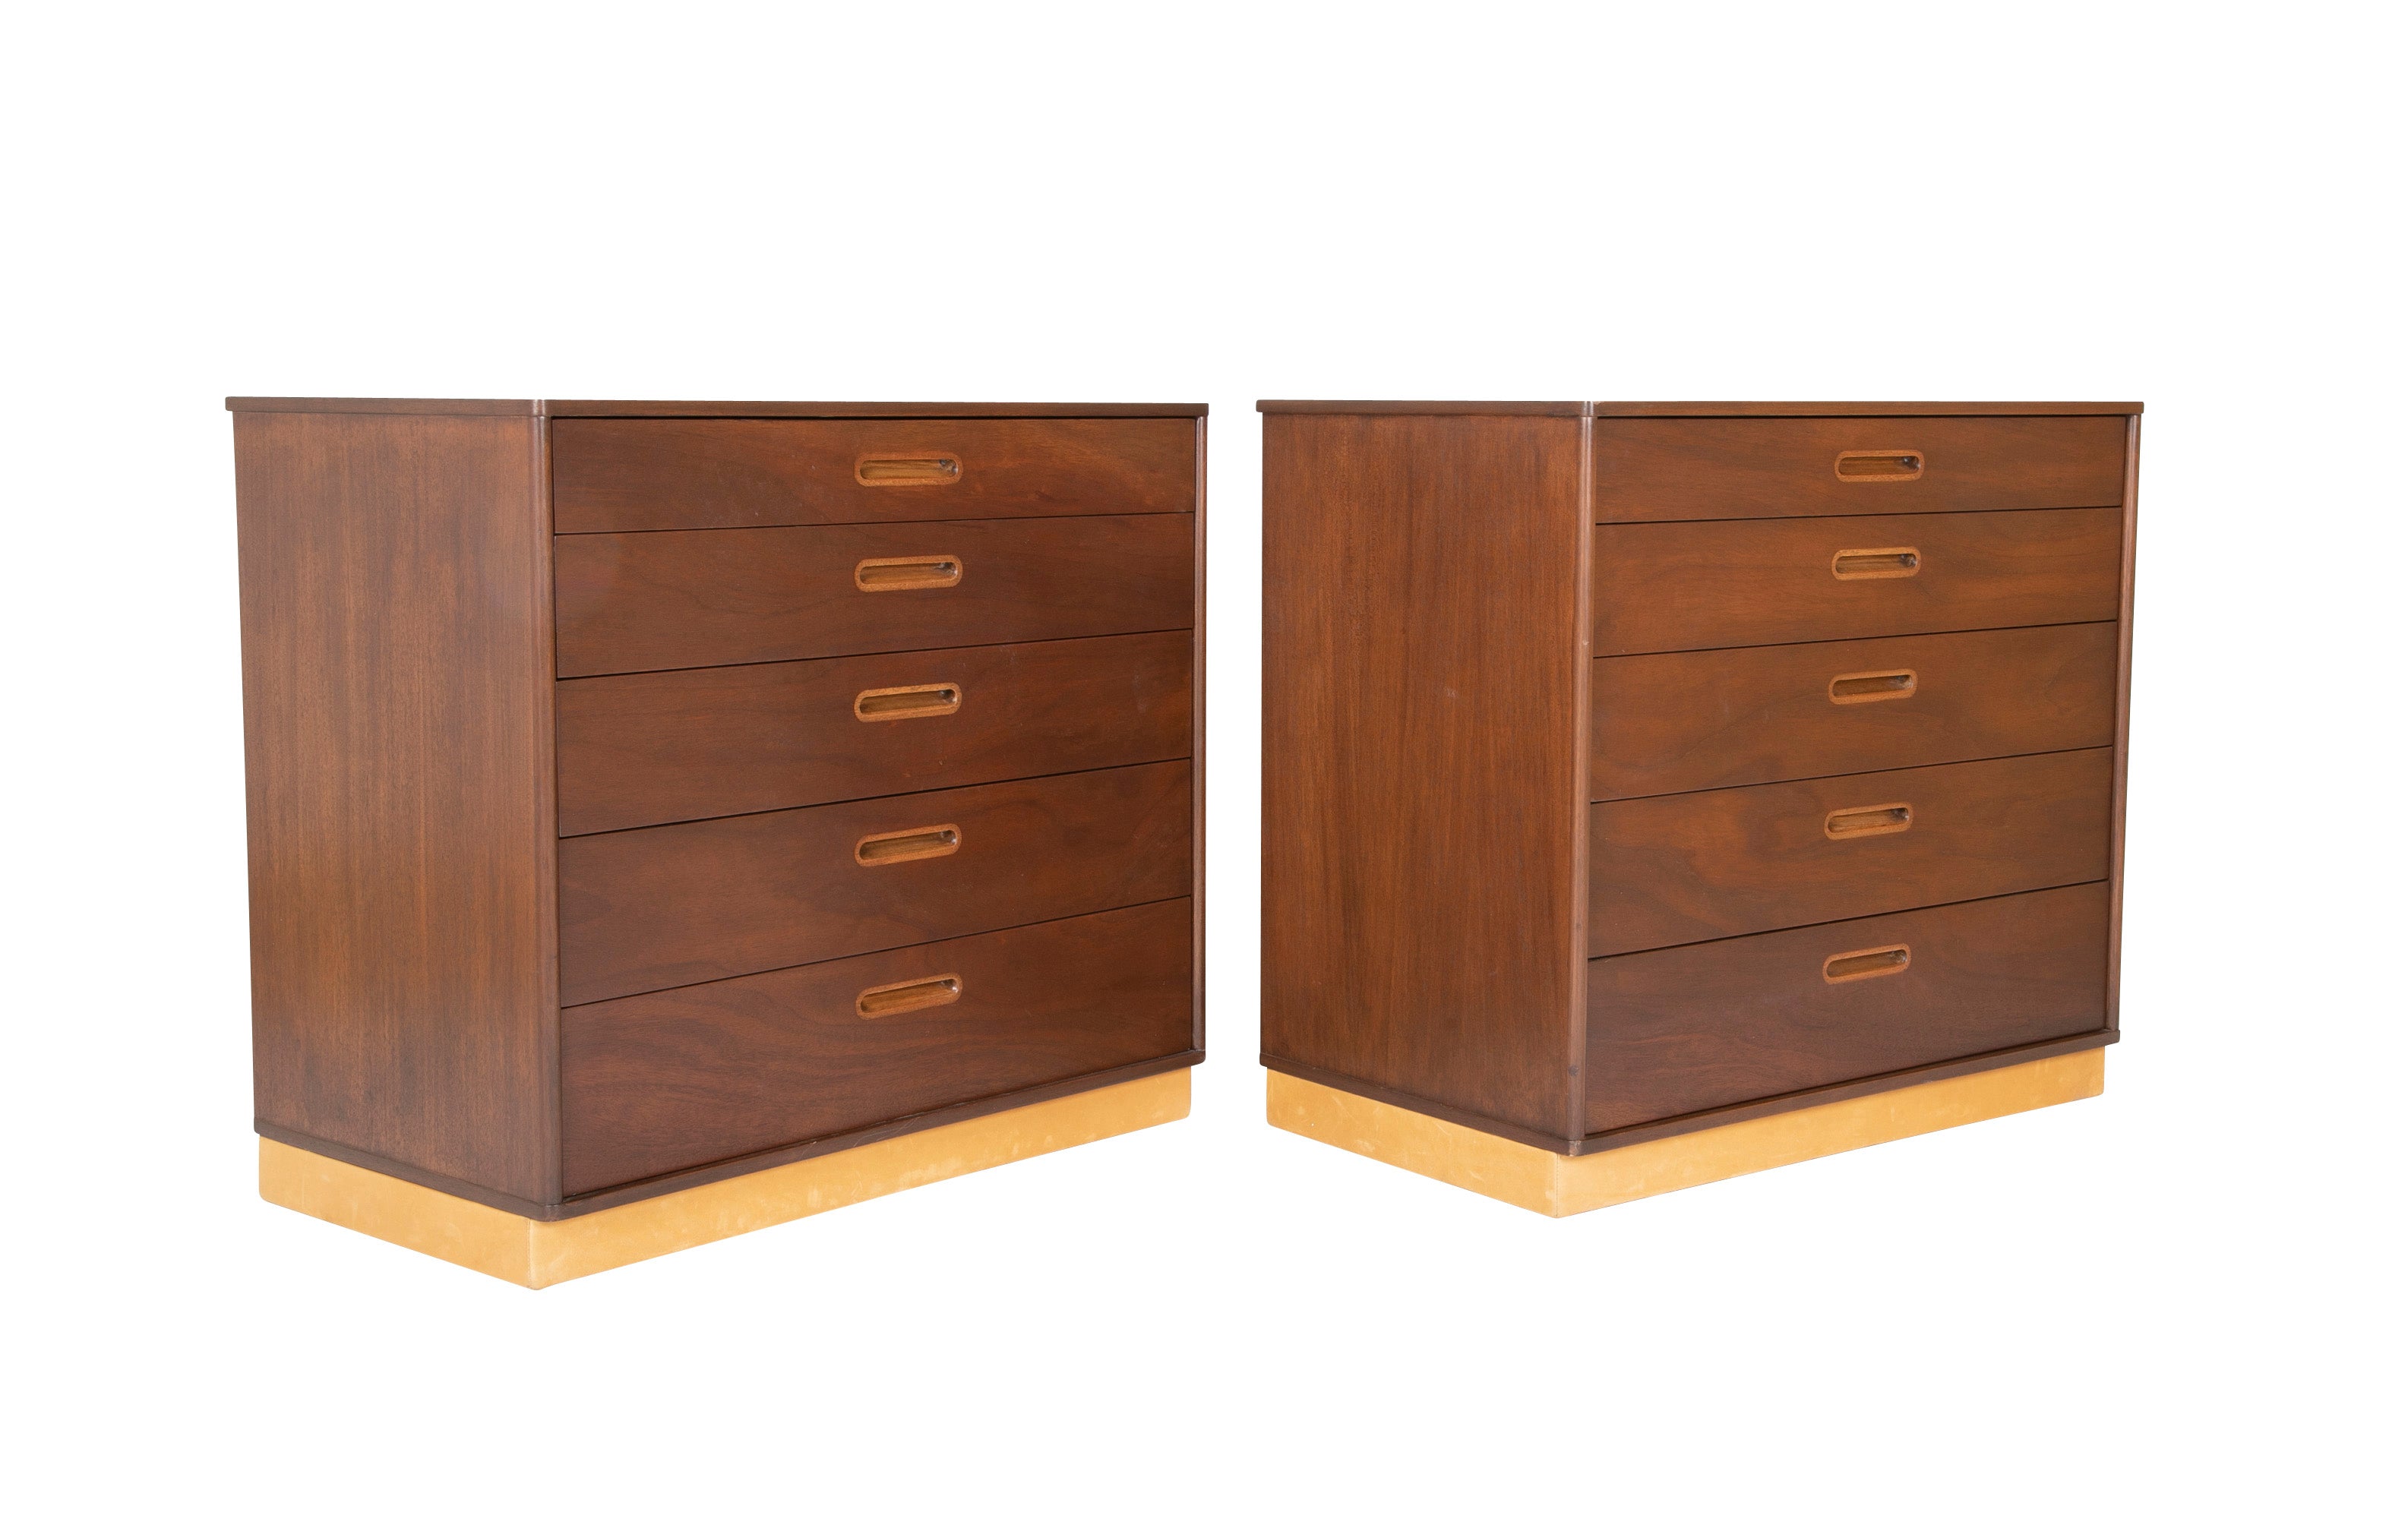 Pair of Leather and Walnut Chests Designed by Edward Wormley for Dunbar